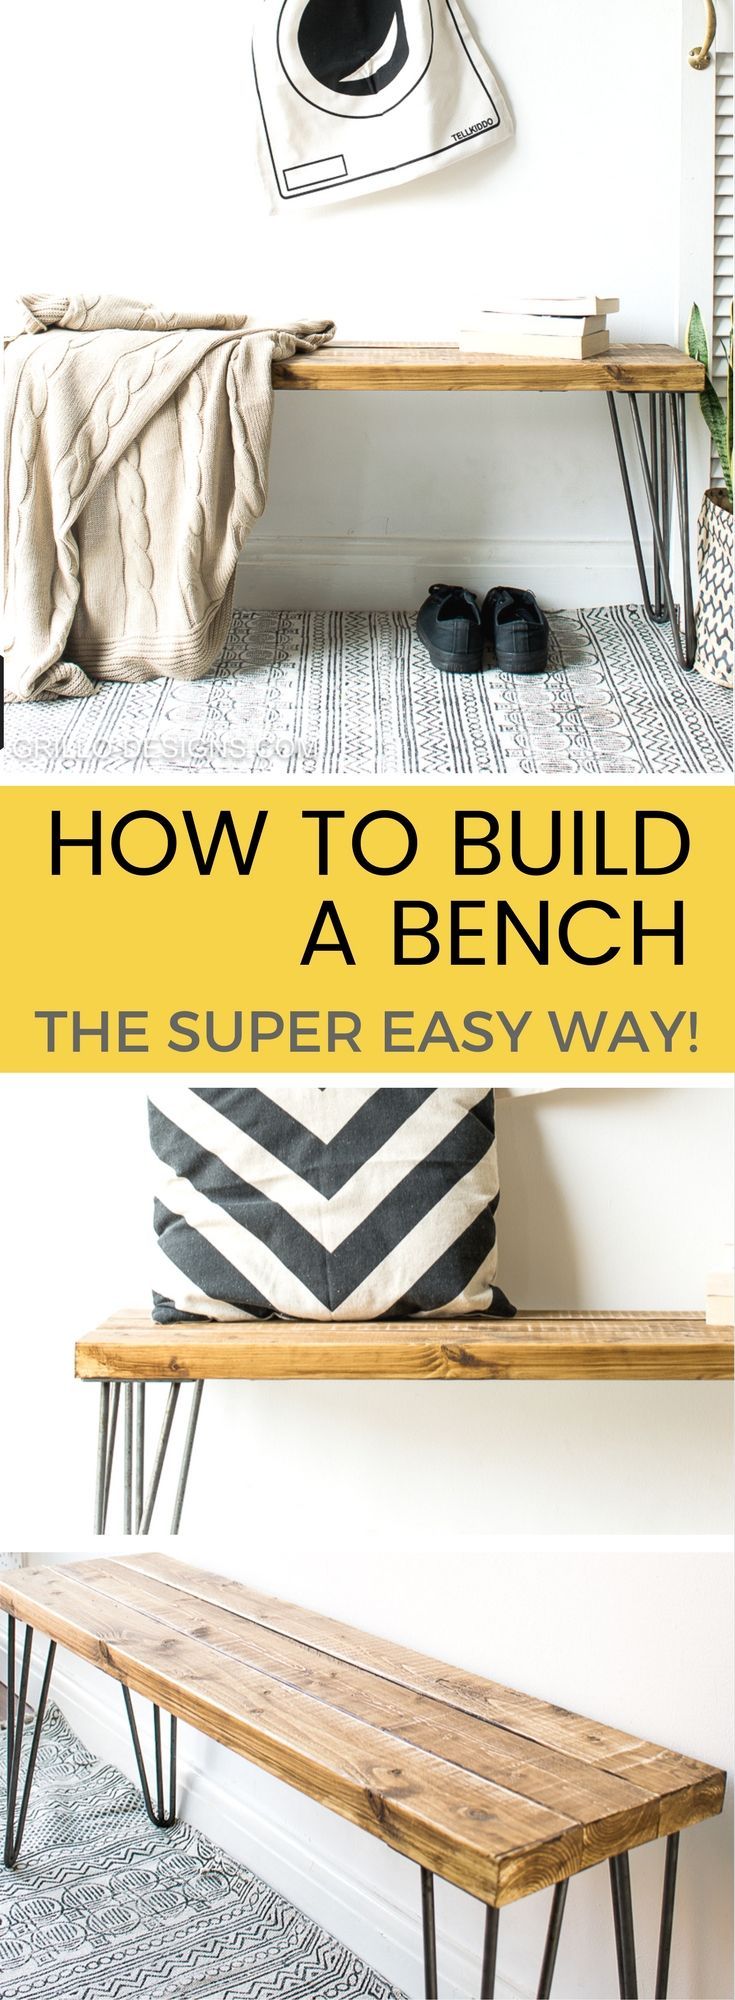 How to build a bench - the super EASY WAY! -   18 diy bench plans
 ideas